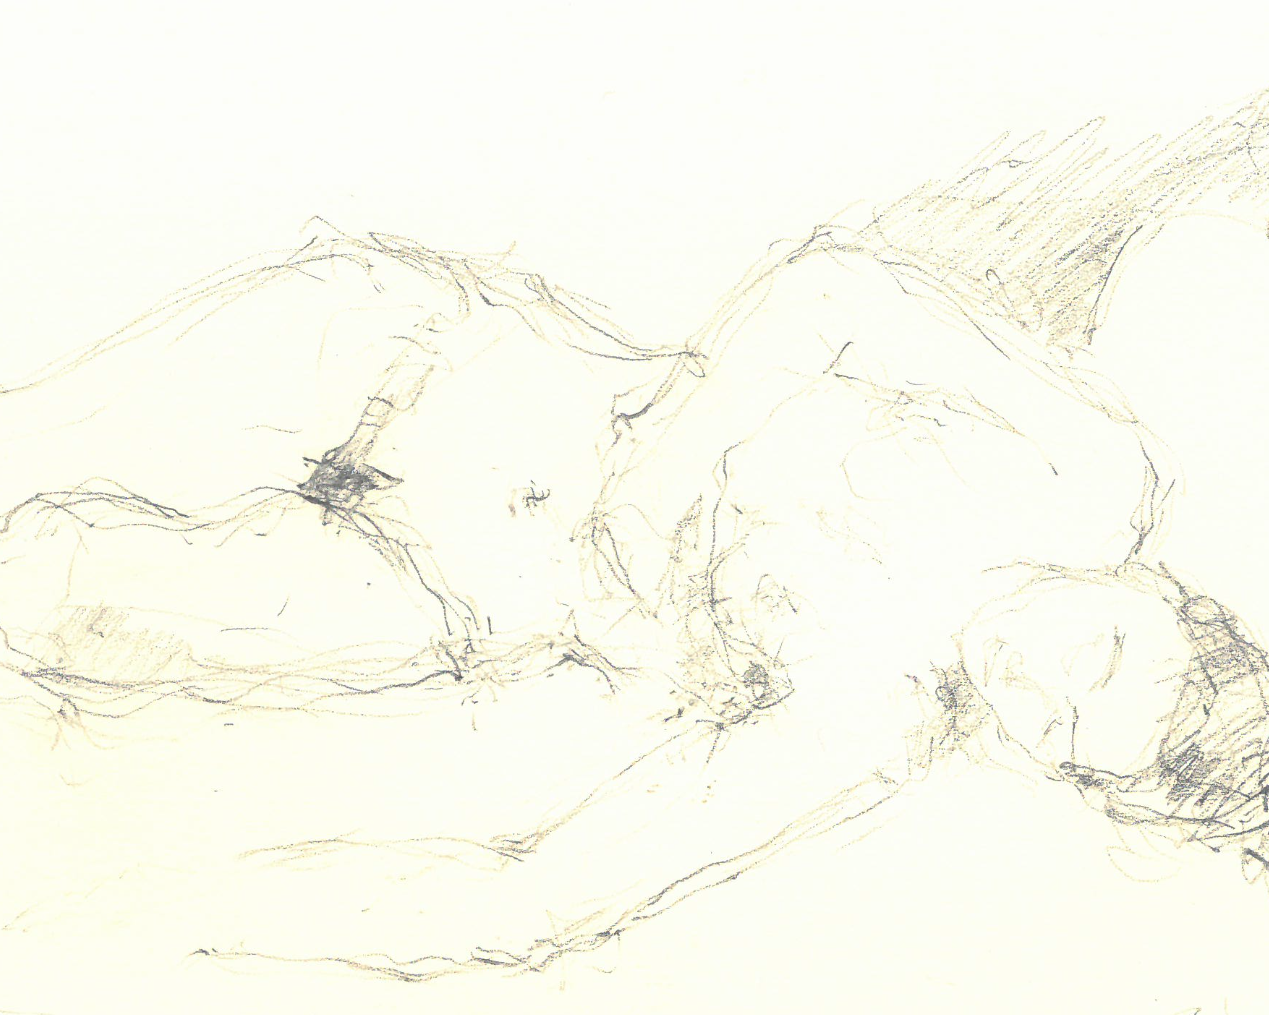 An image of a drawing of a life model. Pencil on paper.